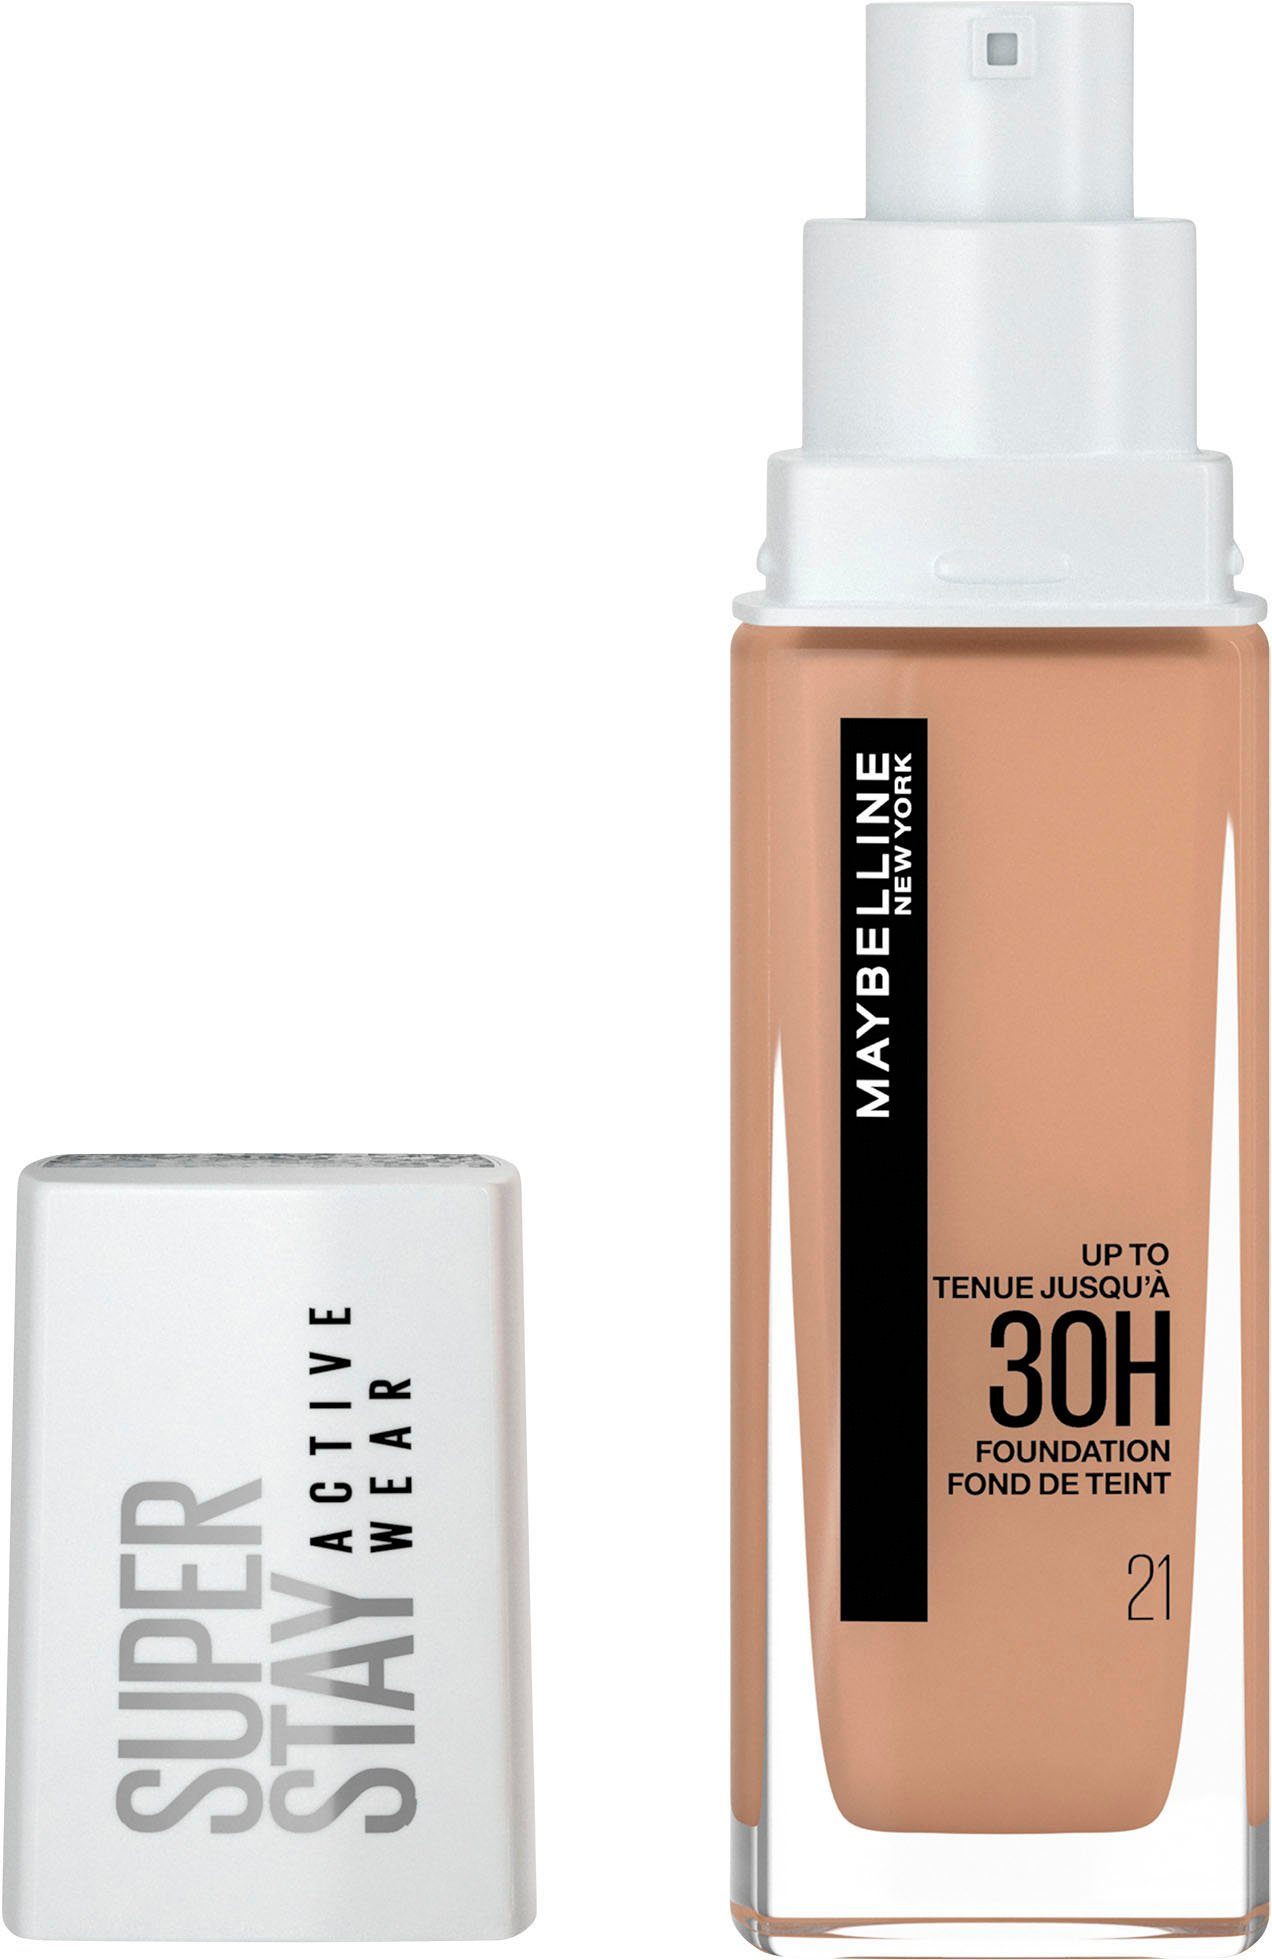 NEW Beige Stay Wear YORK Active MAYBELLINE Nude 21 Super Foundation